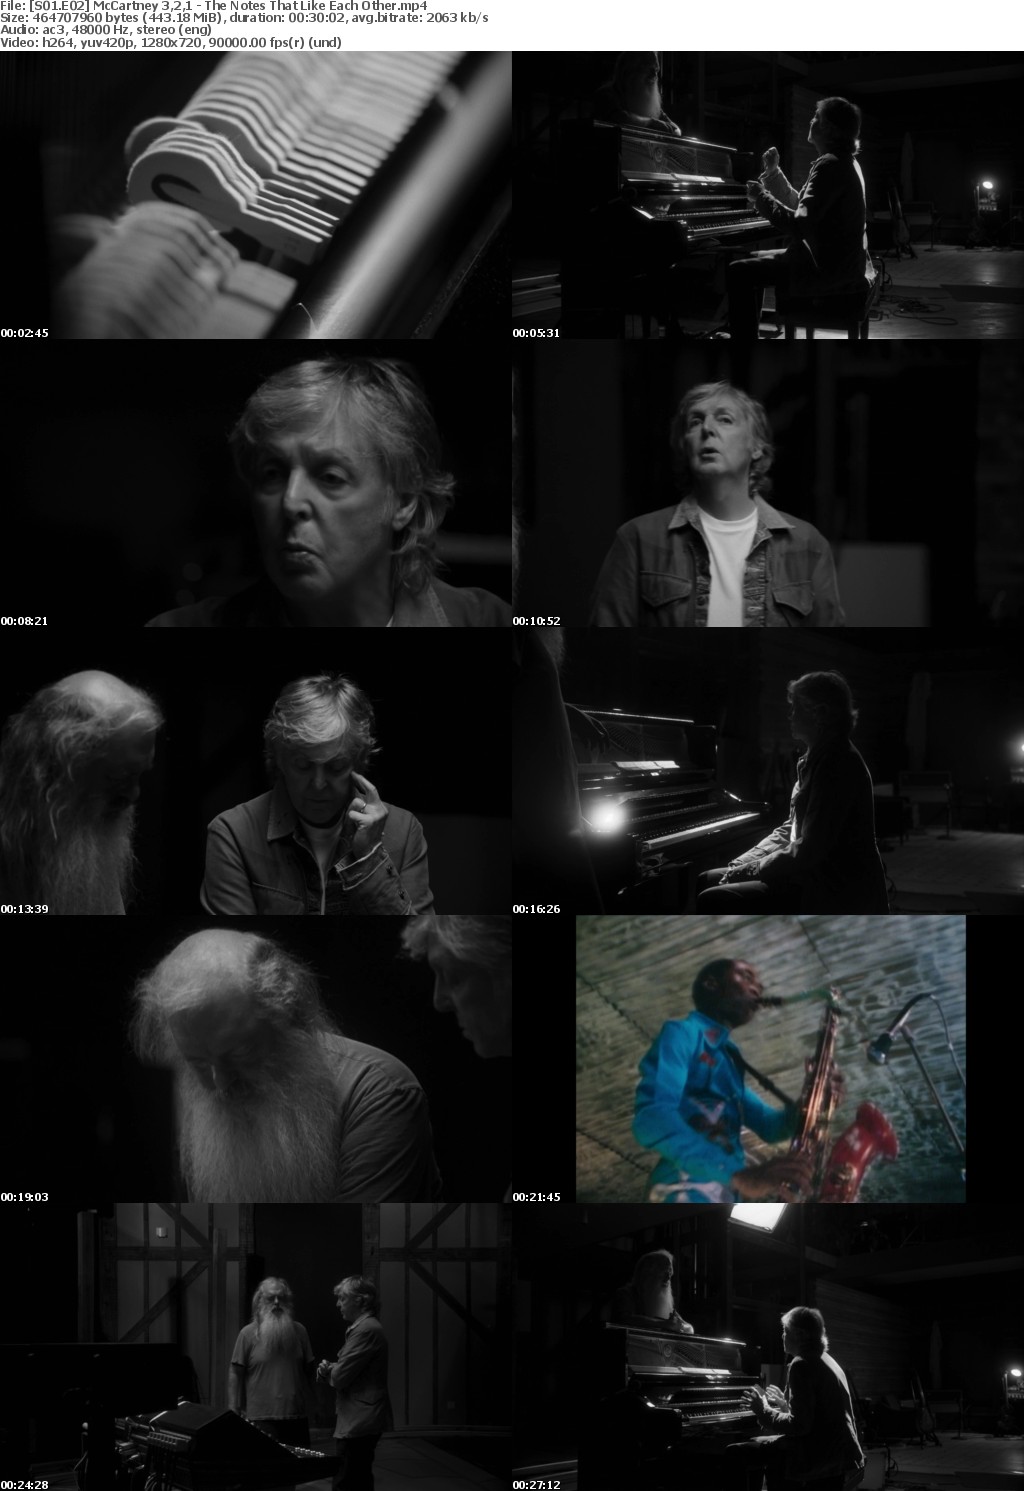 McCartney 3,2,1 S1 E2 The Notes That Like Each Other MP4 720p H264 WEBRip EzzRips